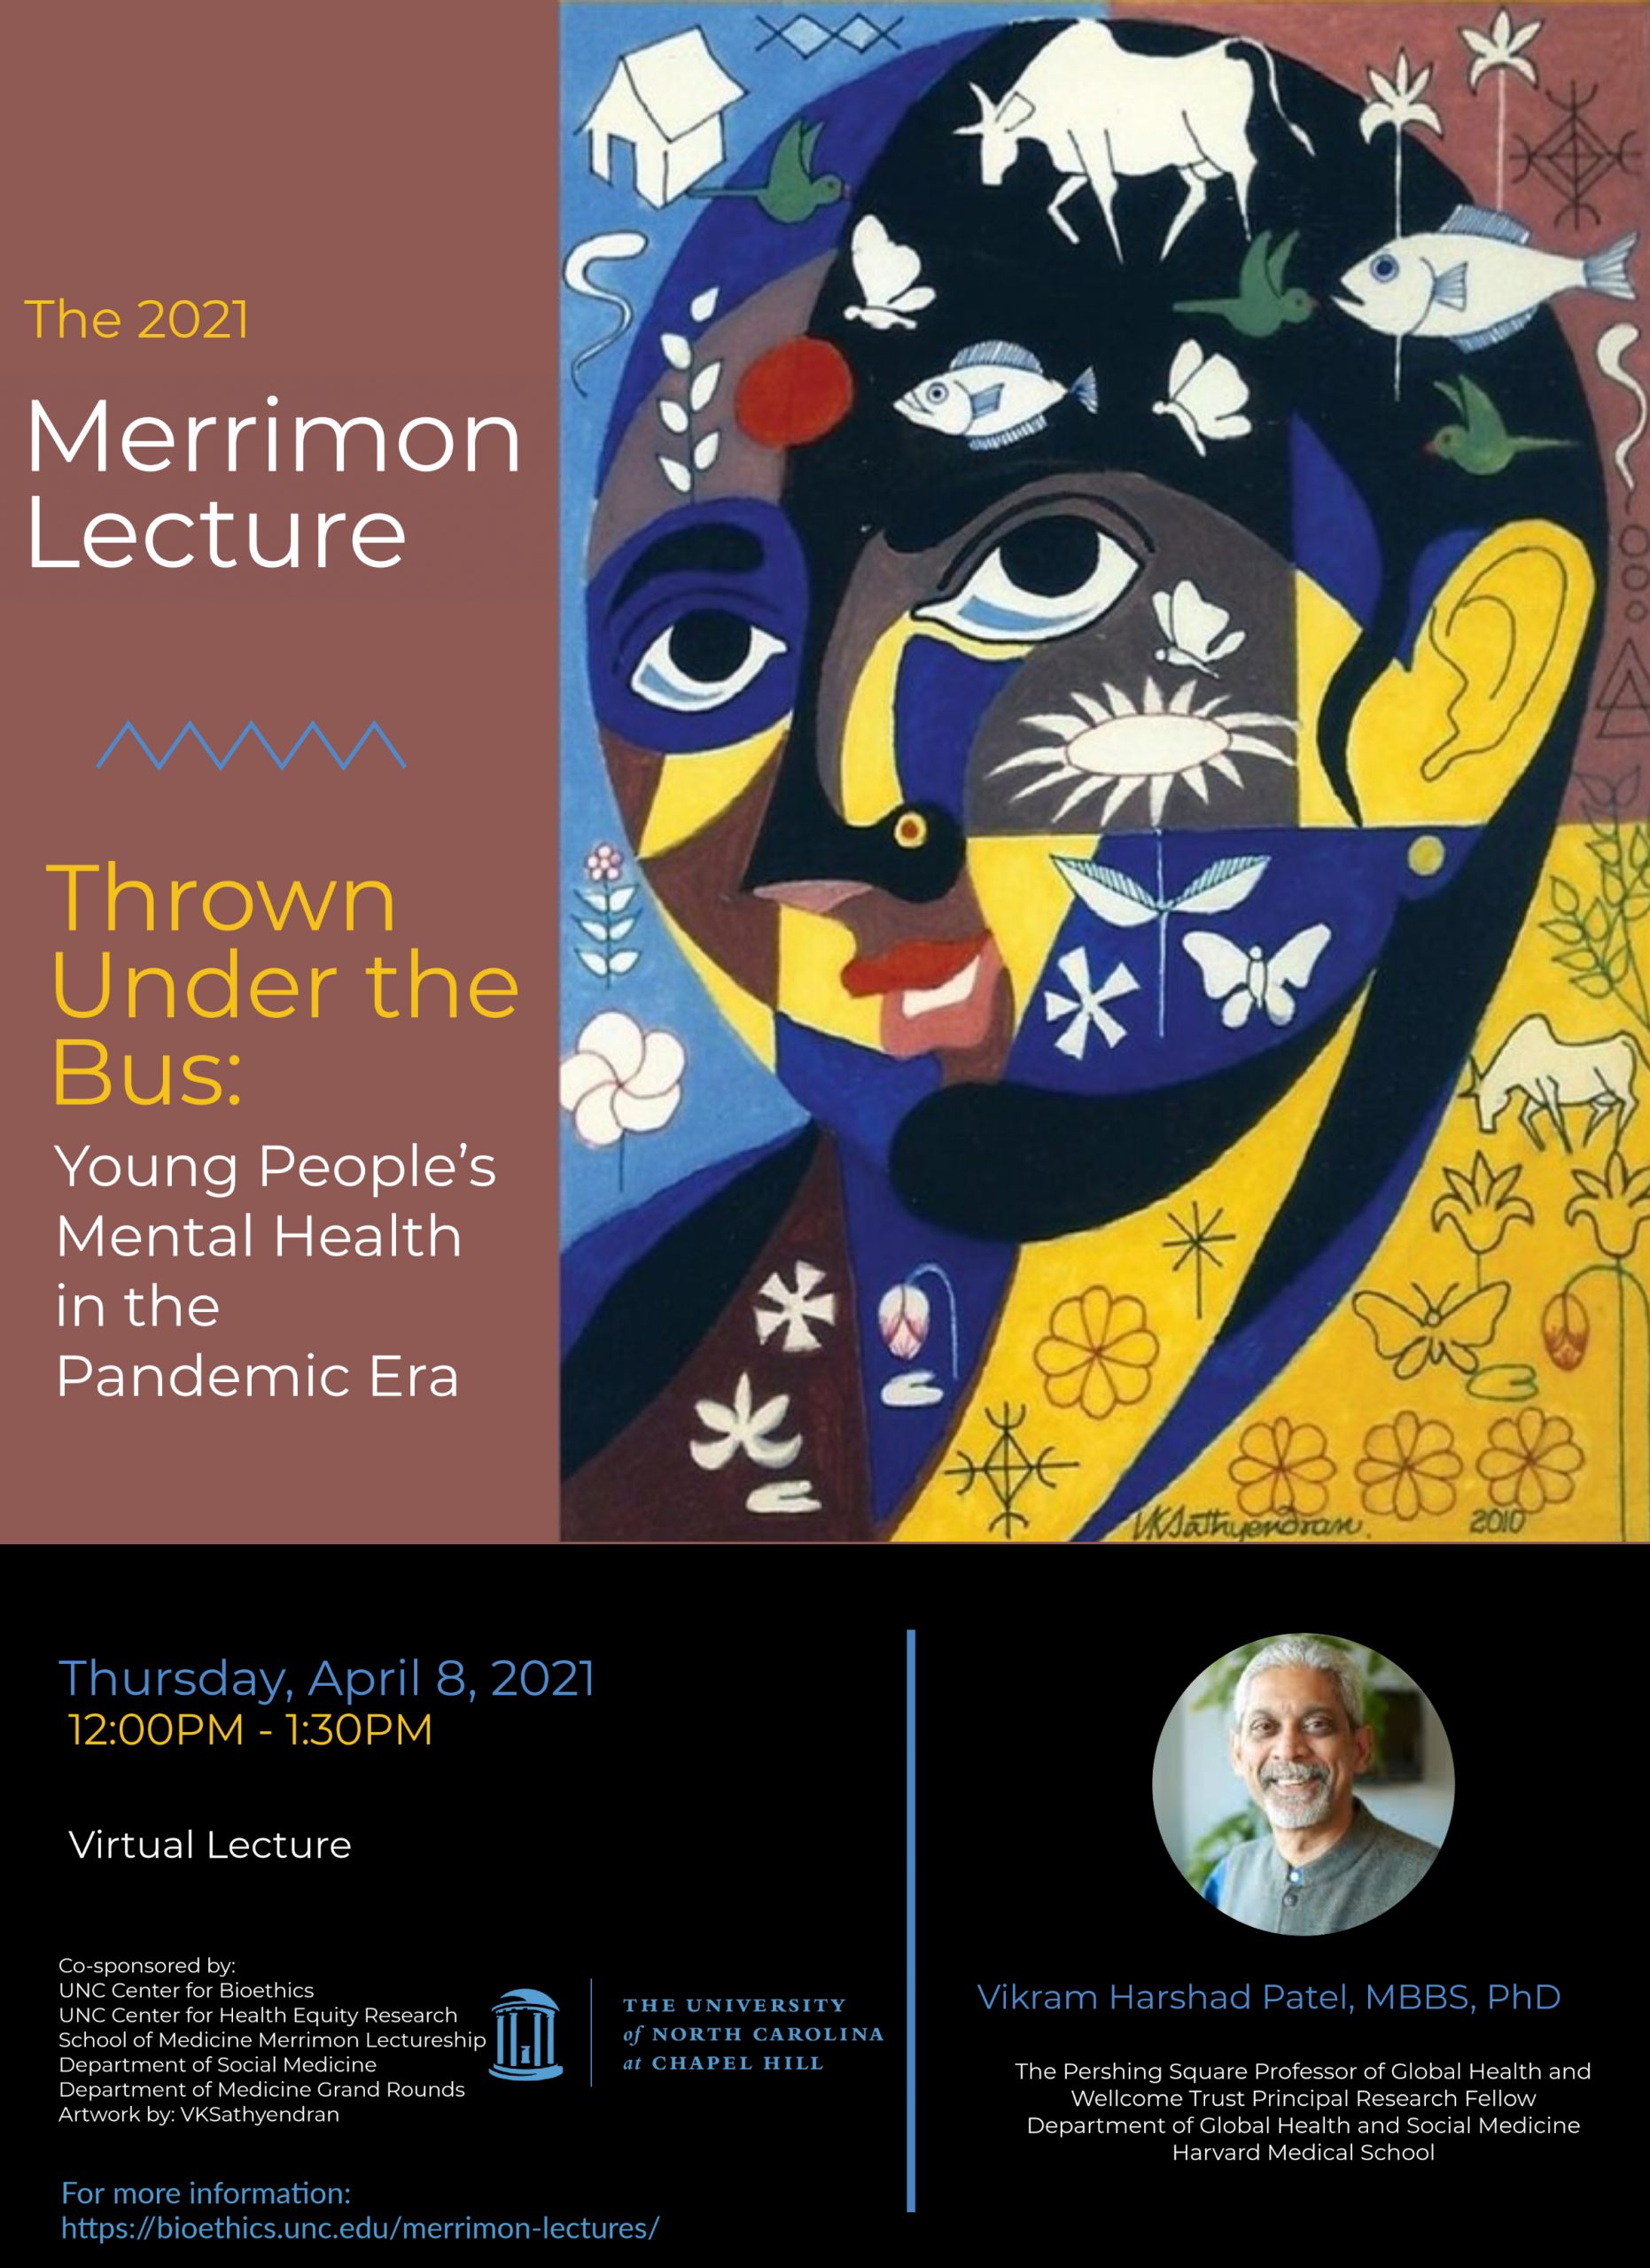 2021 Merrimon Lecture poster, reference text above for information.